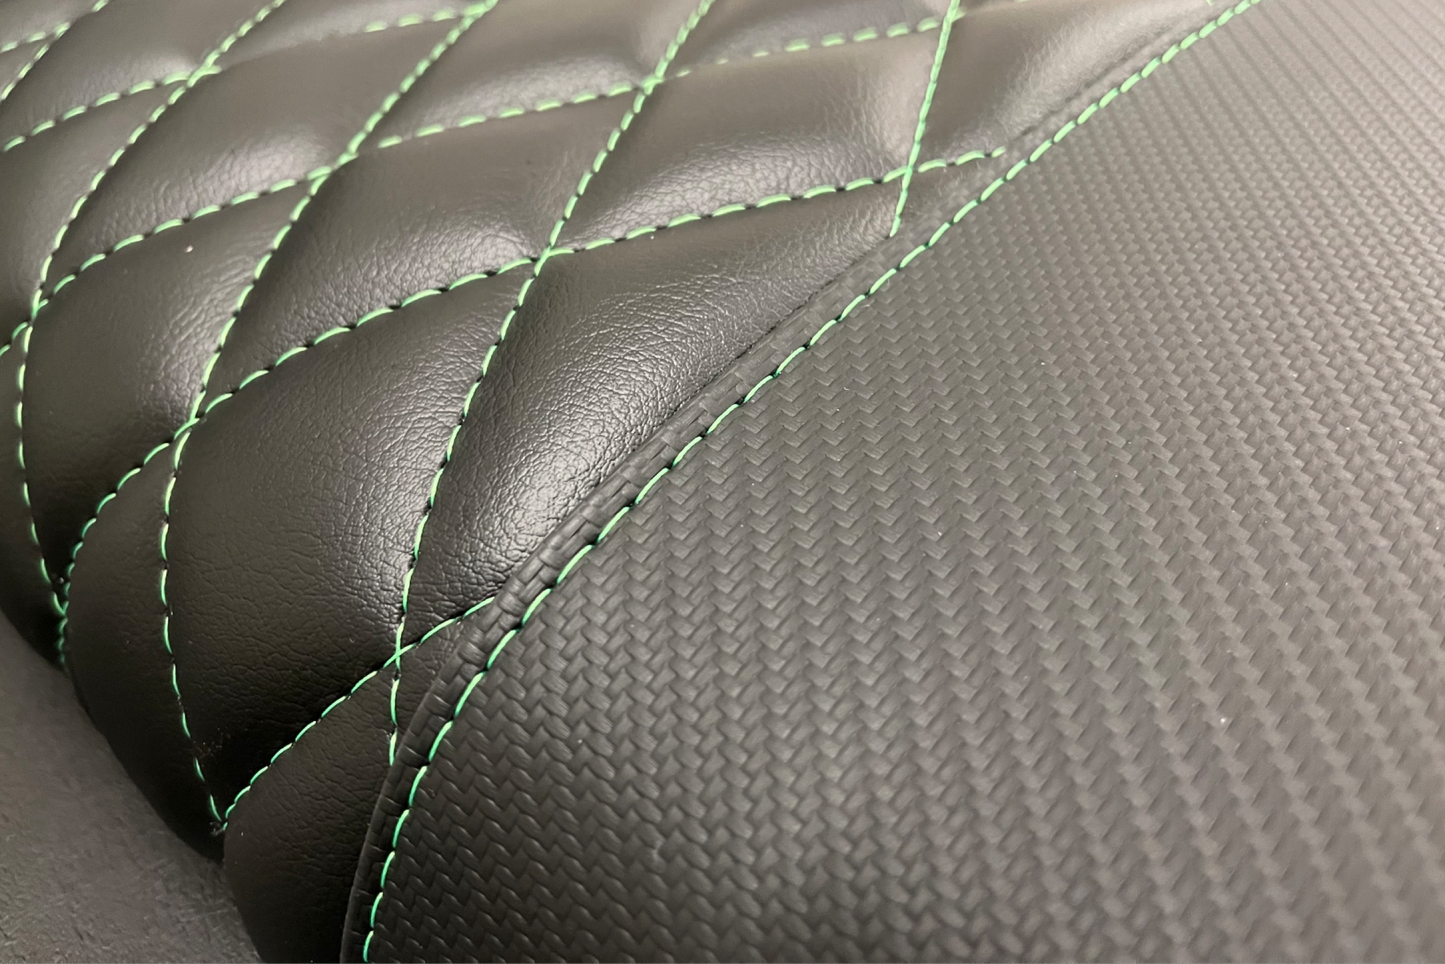 Black Carbon Fiber with Lime Green Stitching